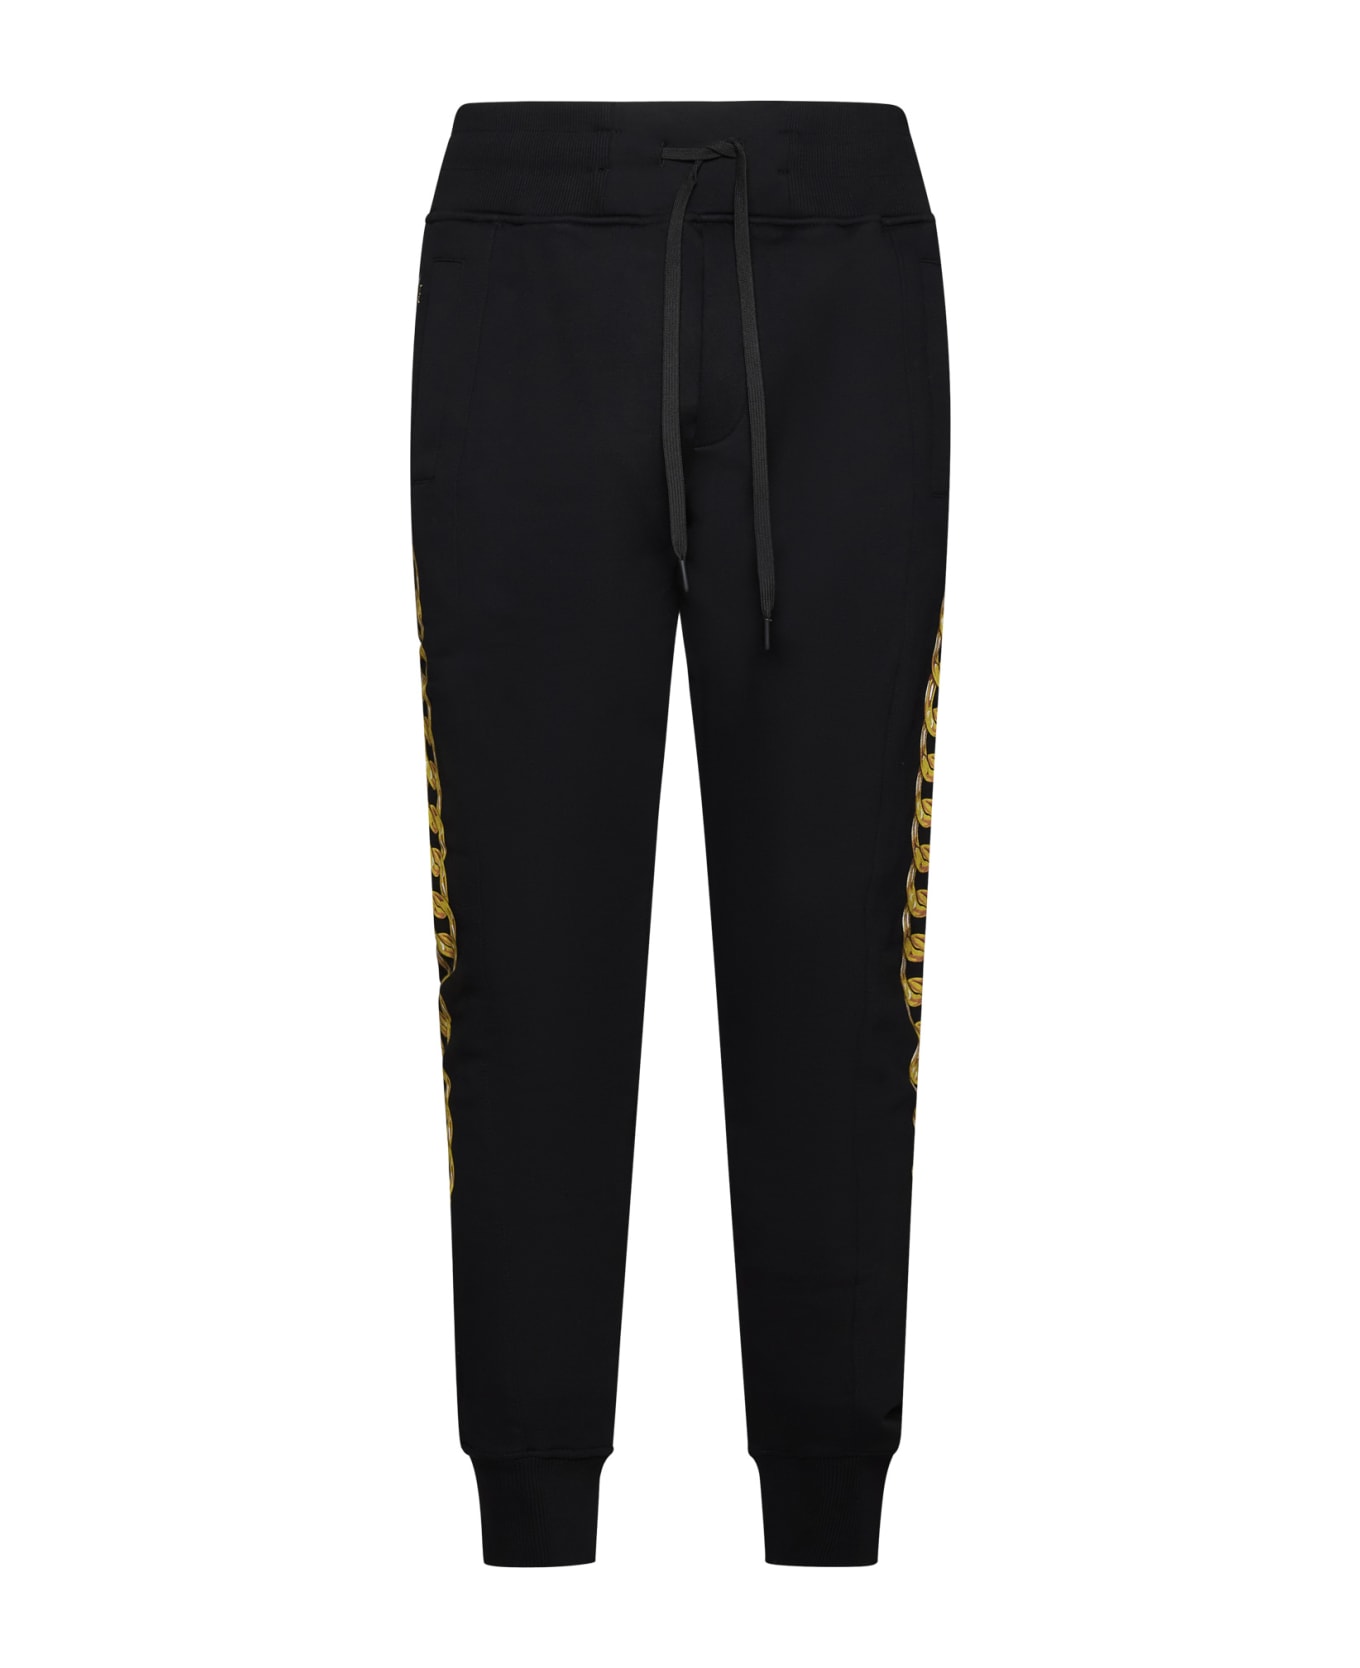 Versace Jeans Couture Jogging Pants - Black gold スウェットパンツ